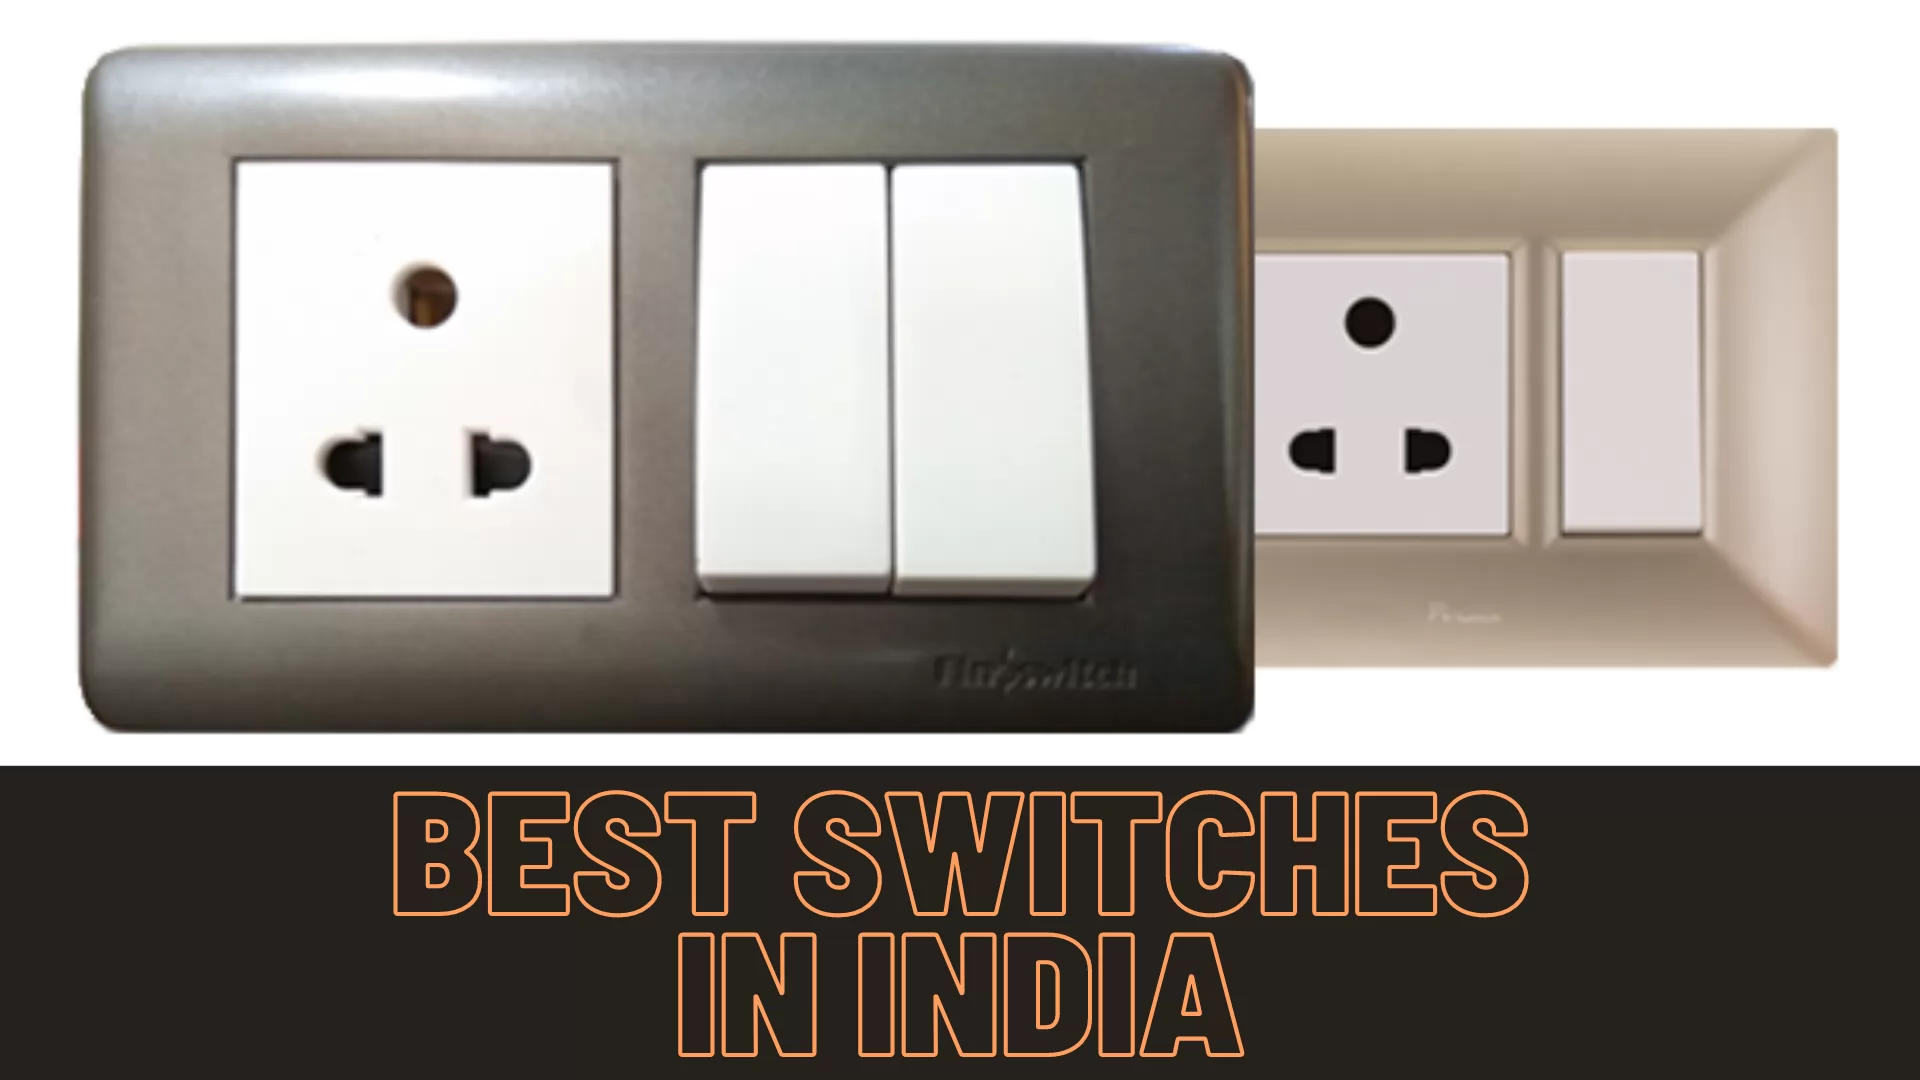 Best Switches In India